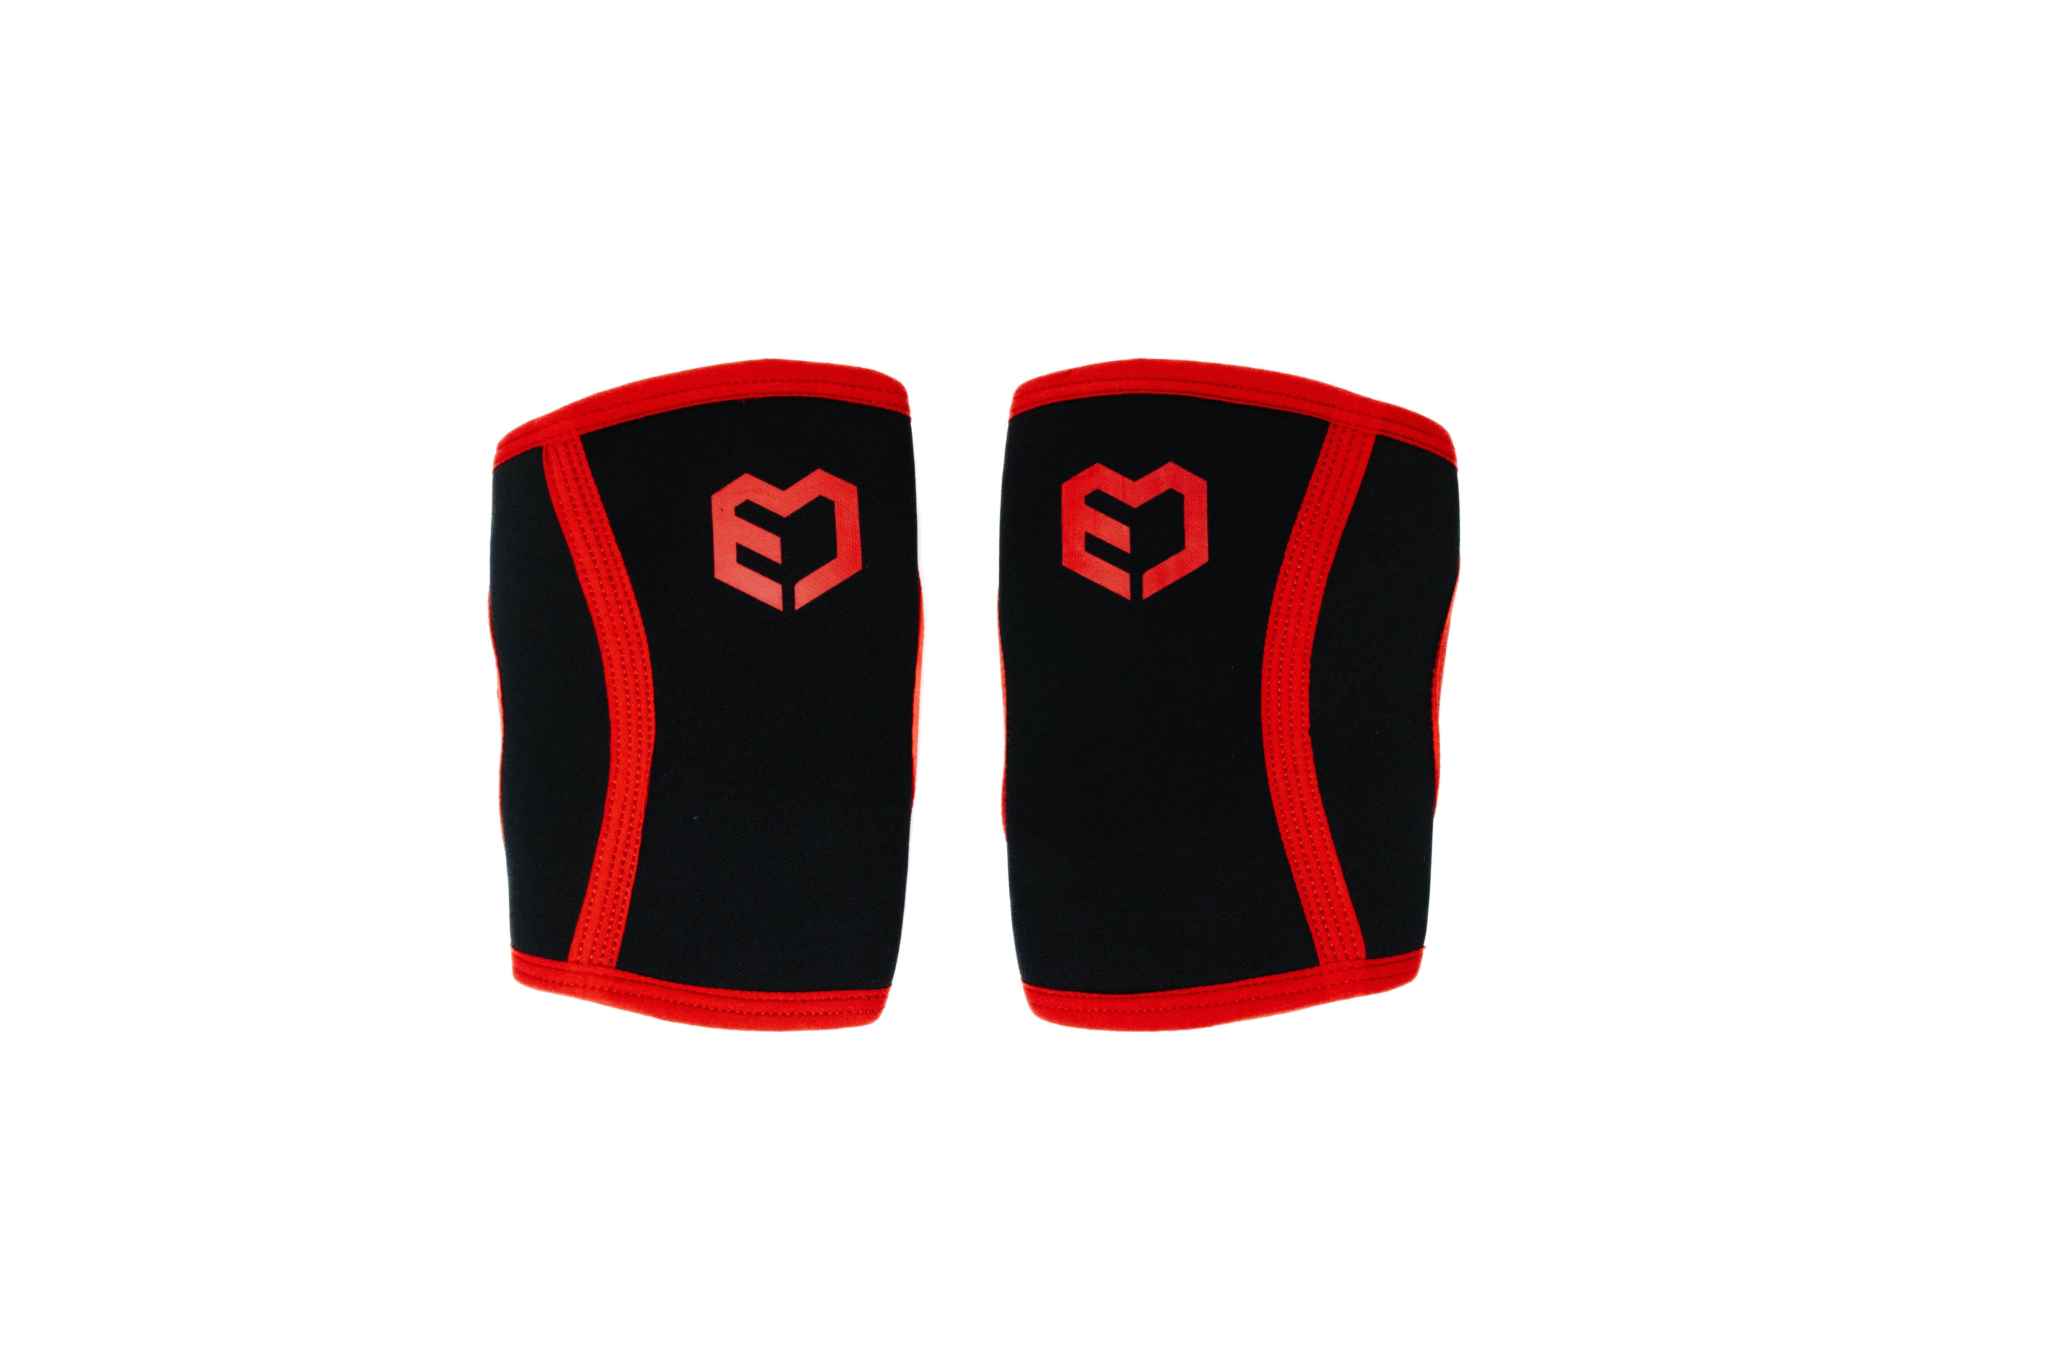 Muscle Engineering Fitness Accessory 7mm Knee Sleeves